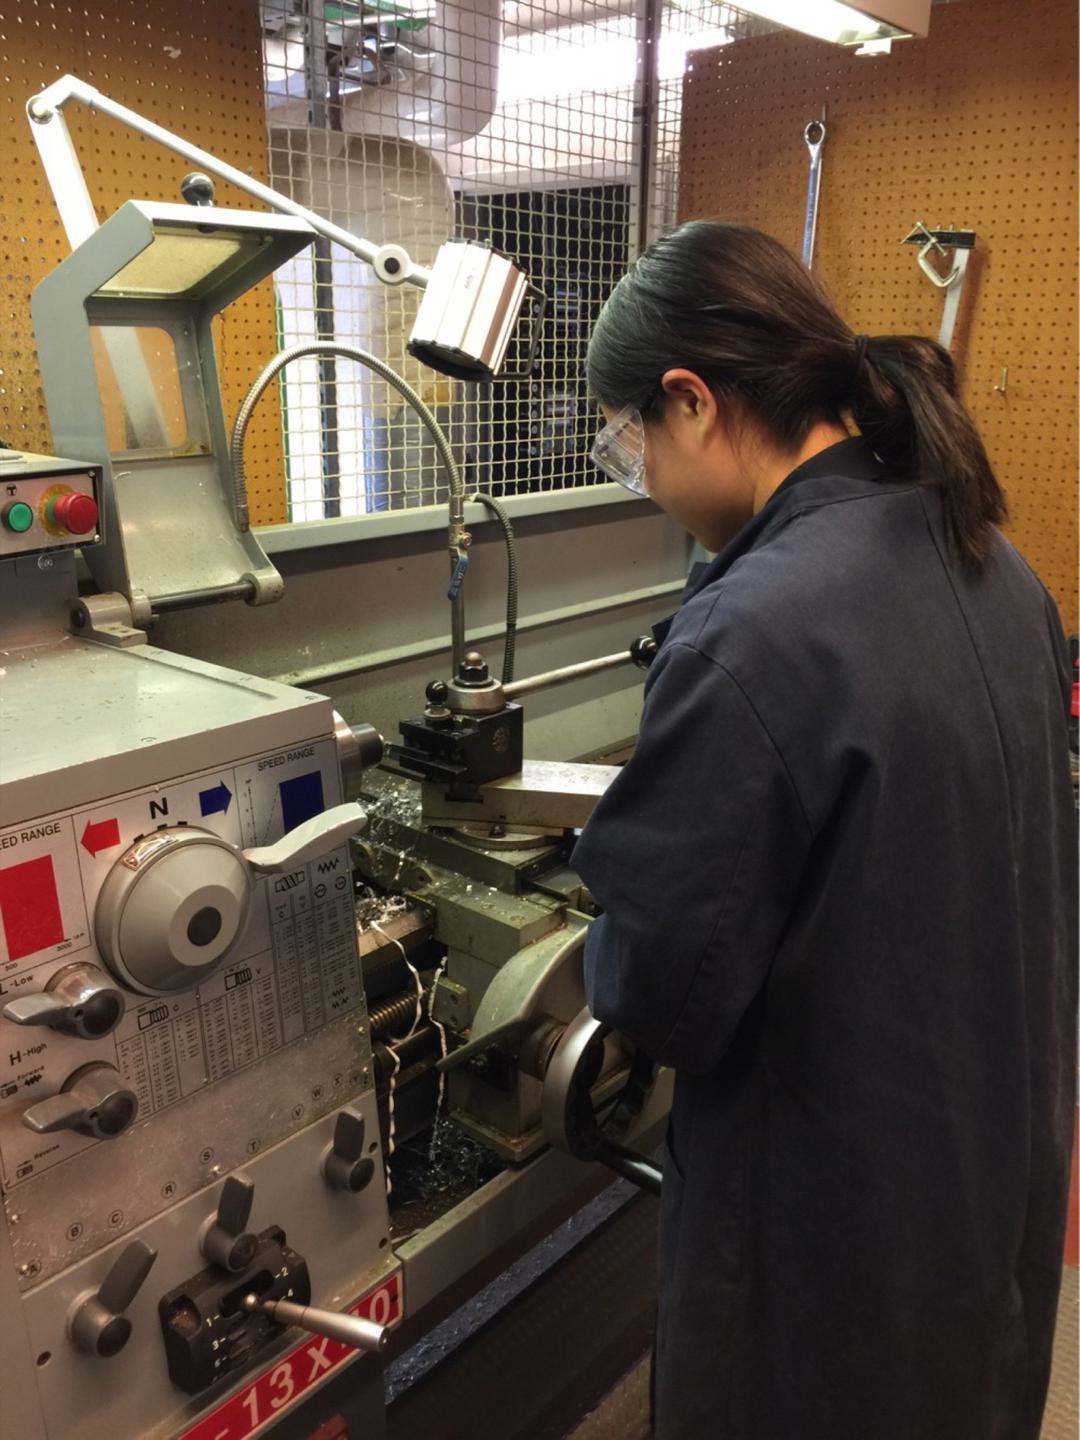 A student wearing protective glasses works on a lathe in the machine shop.